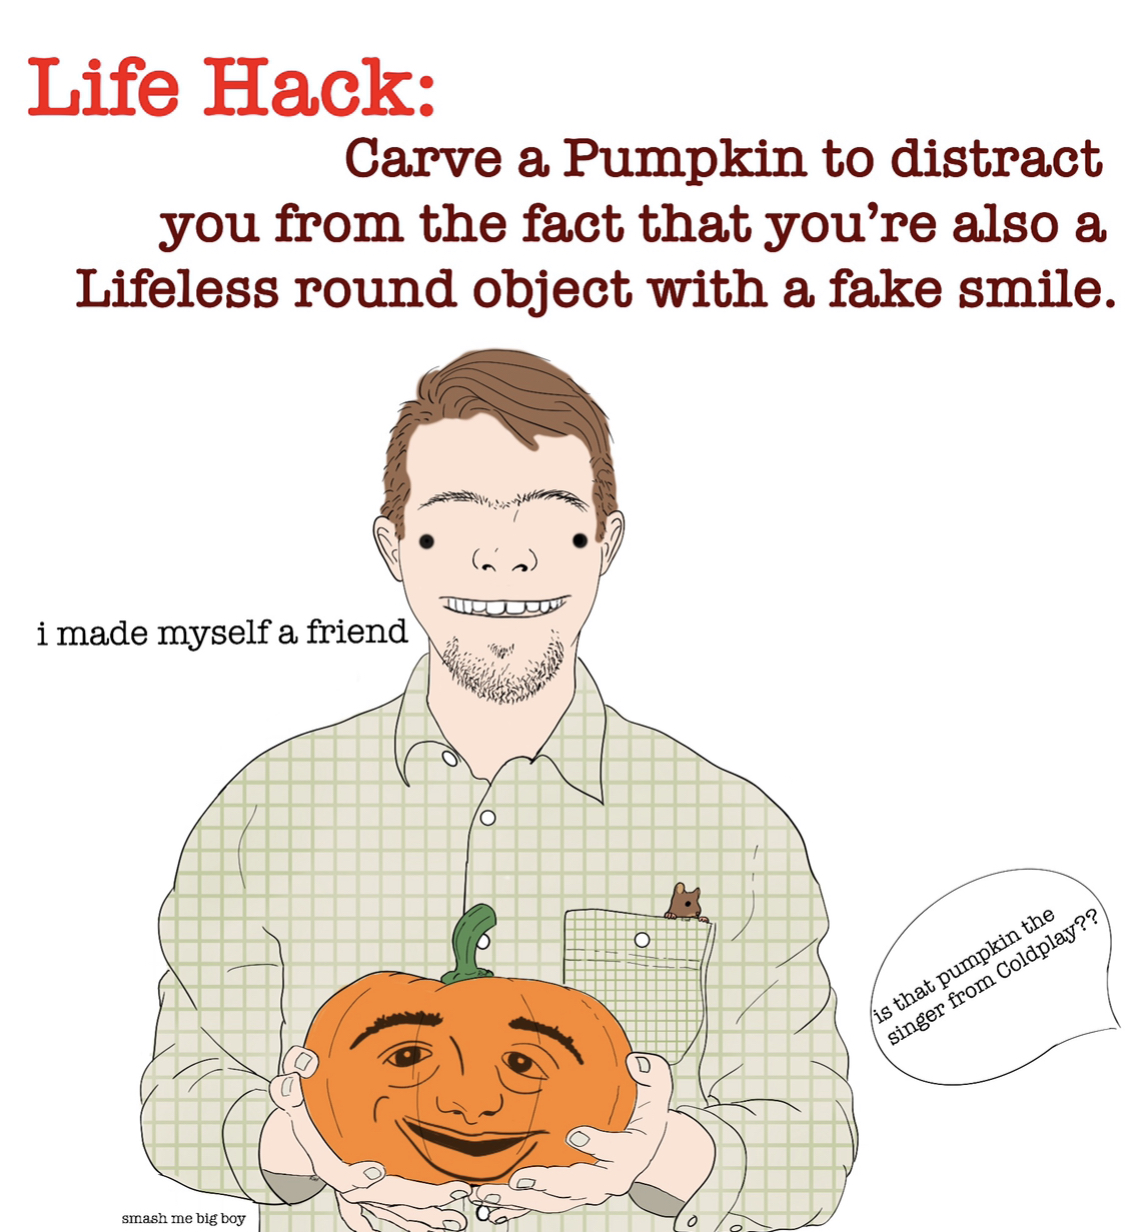 smile - Life Hack Carve a Pumpkin to distract you from the fact that you're also a Lifeless round object with a fake smile. i made myself a friend is that pumpkin the singer from Coldplay